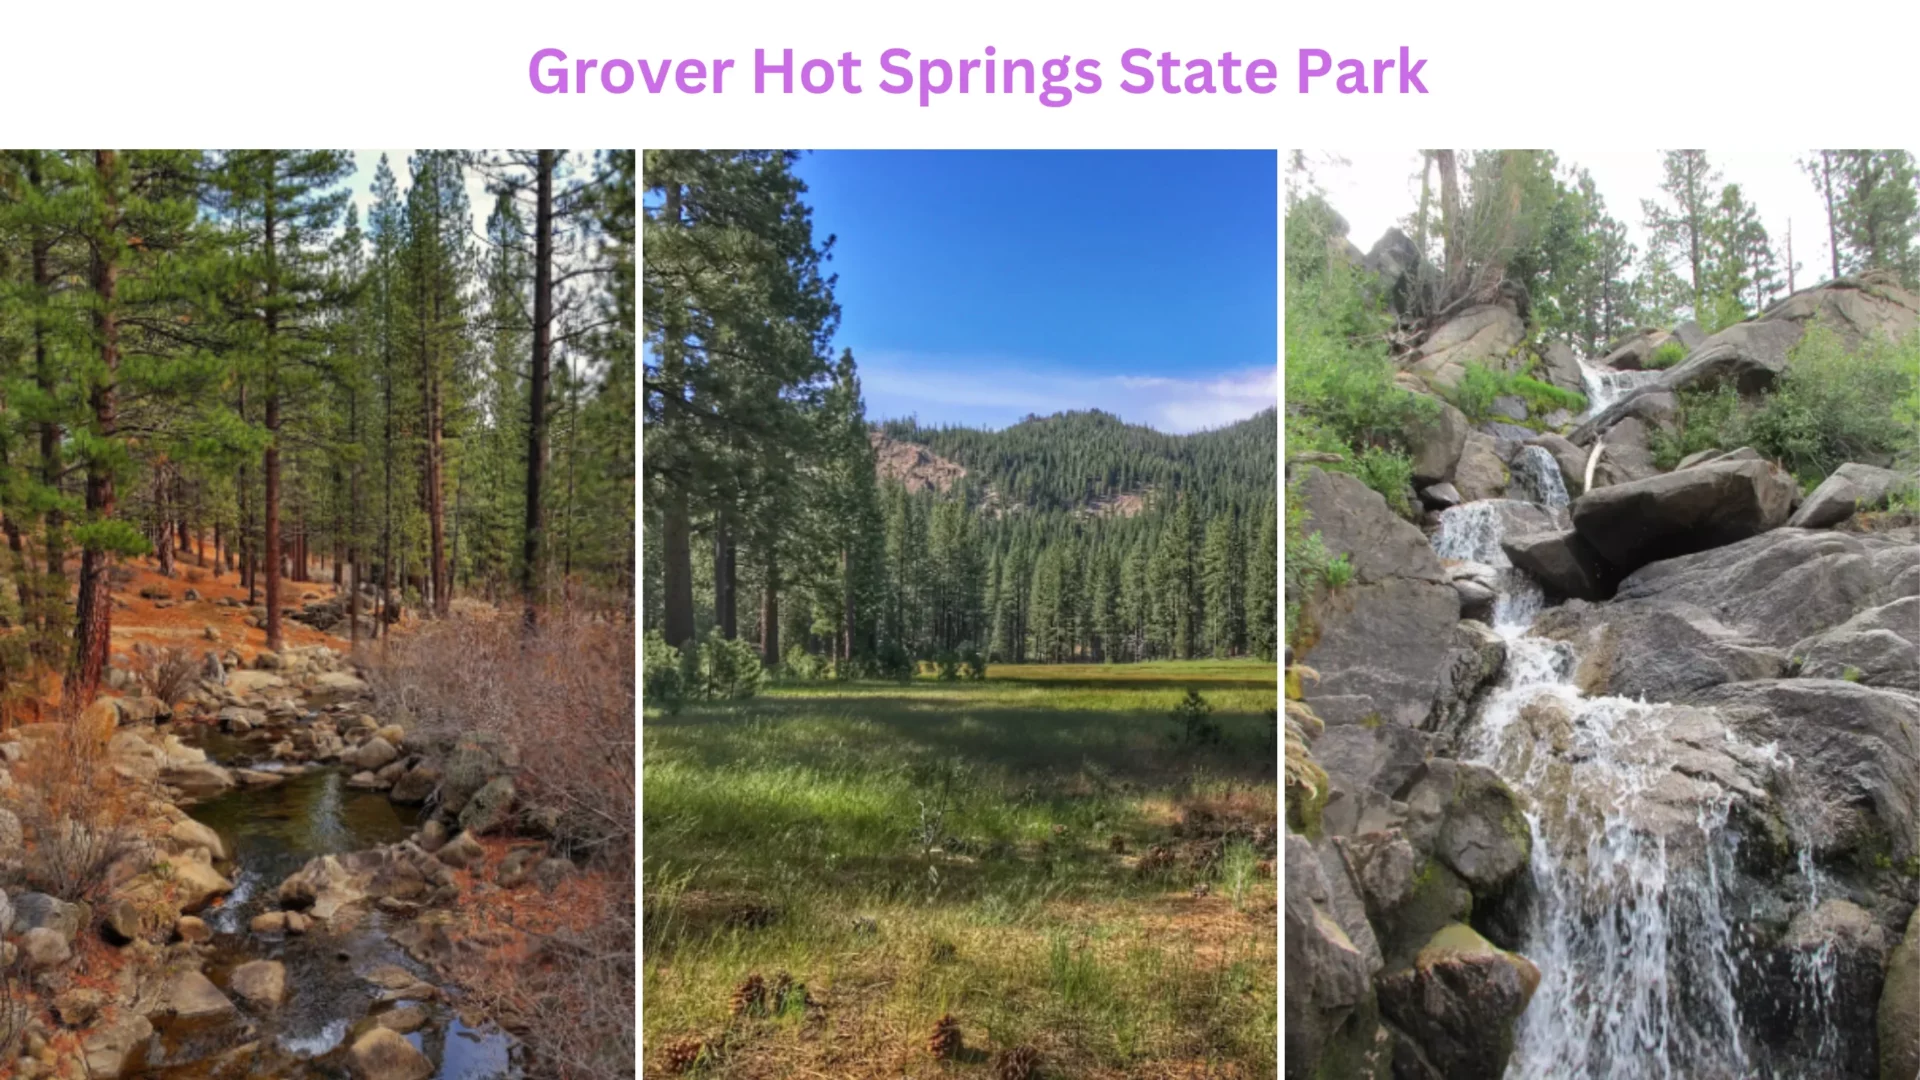 Grover Hot Springs State Park